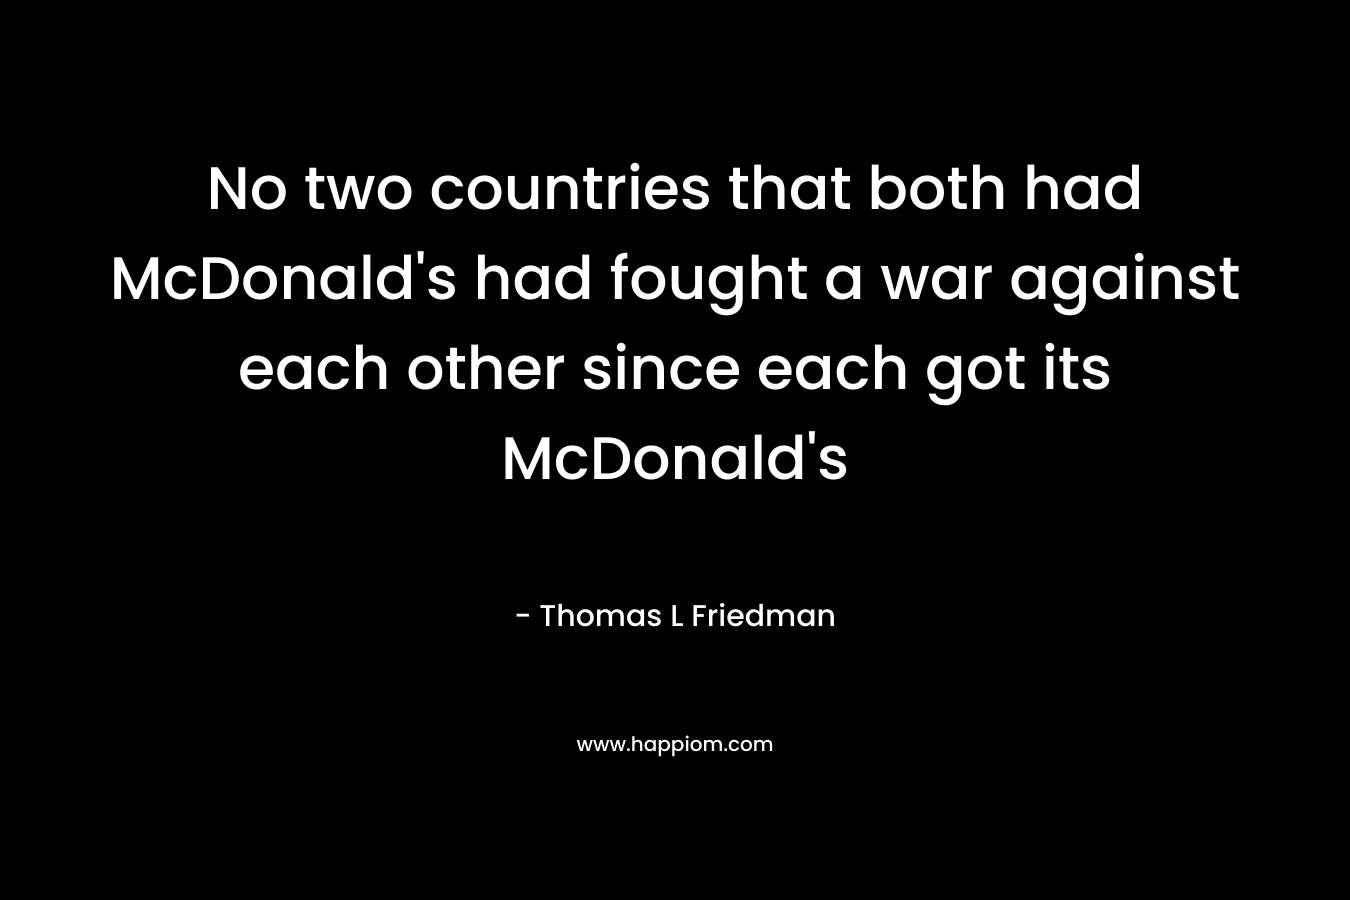 No two countries that both had McDonald's had fought a war against each other since each got its McDonald's